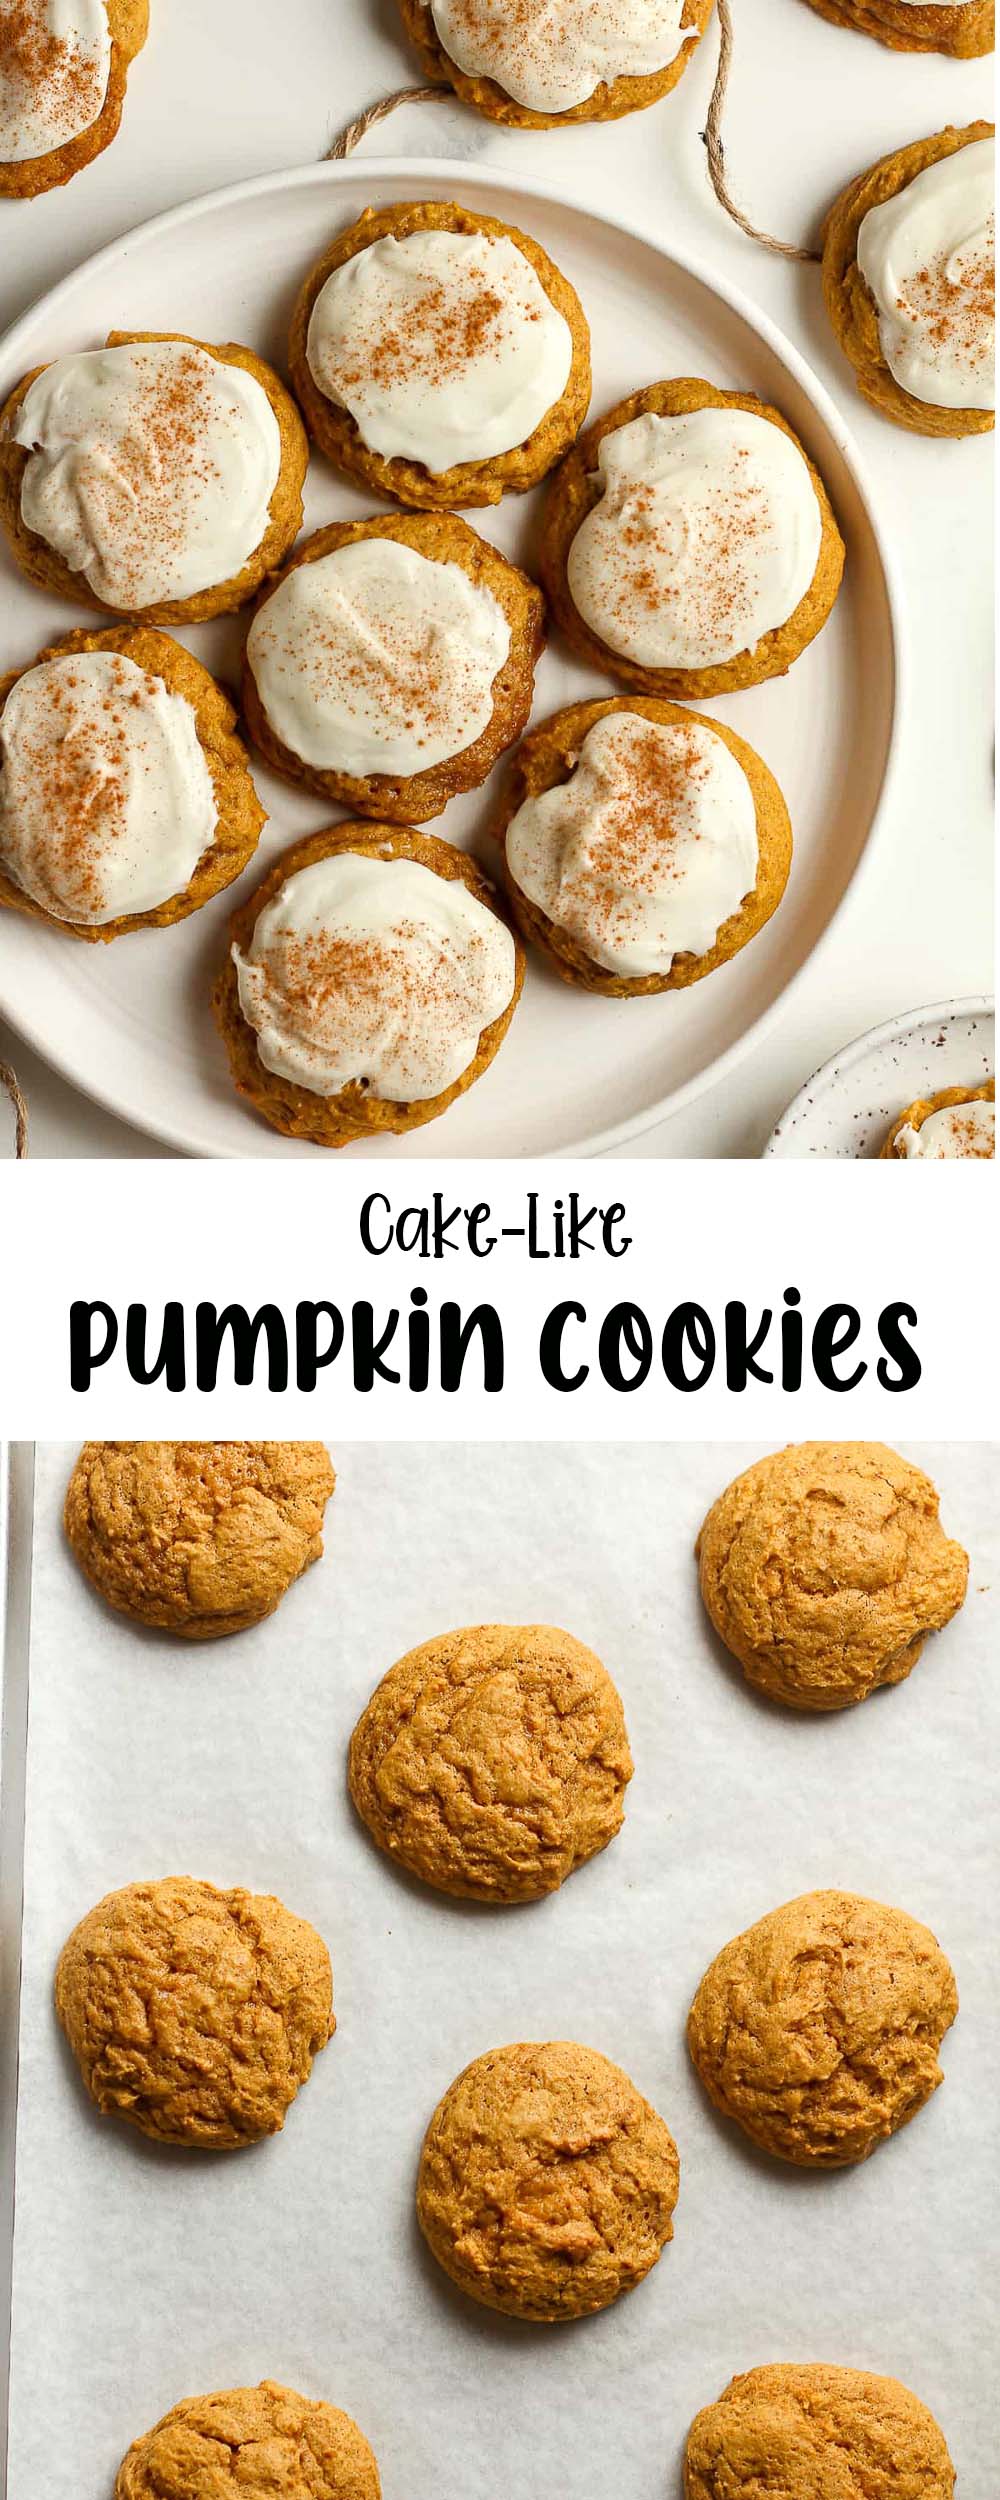 A collage of photos for cake-like pumpkin cookies.